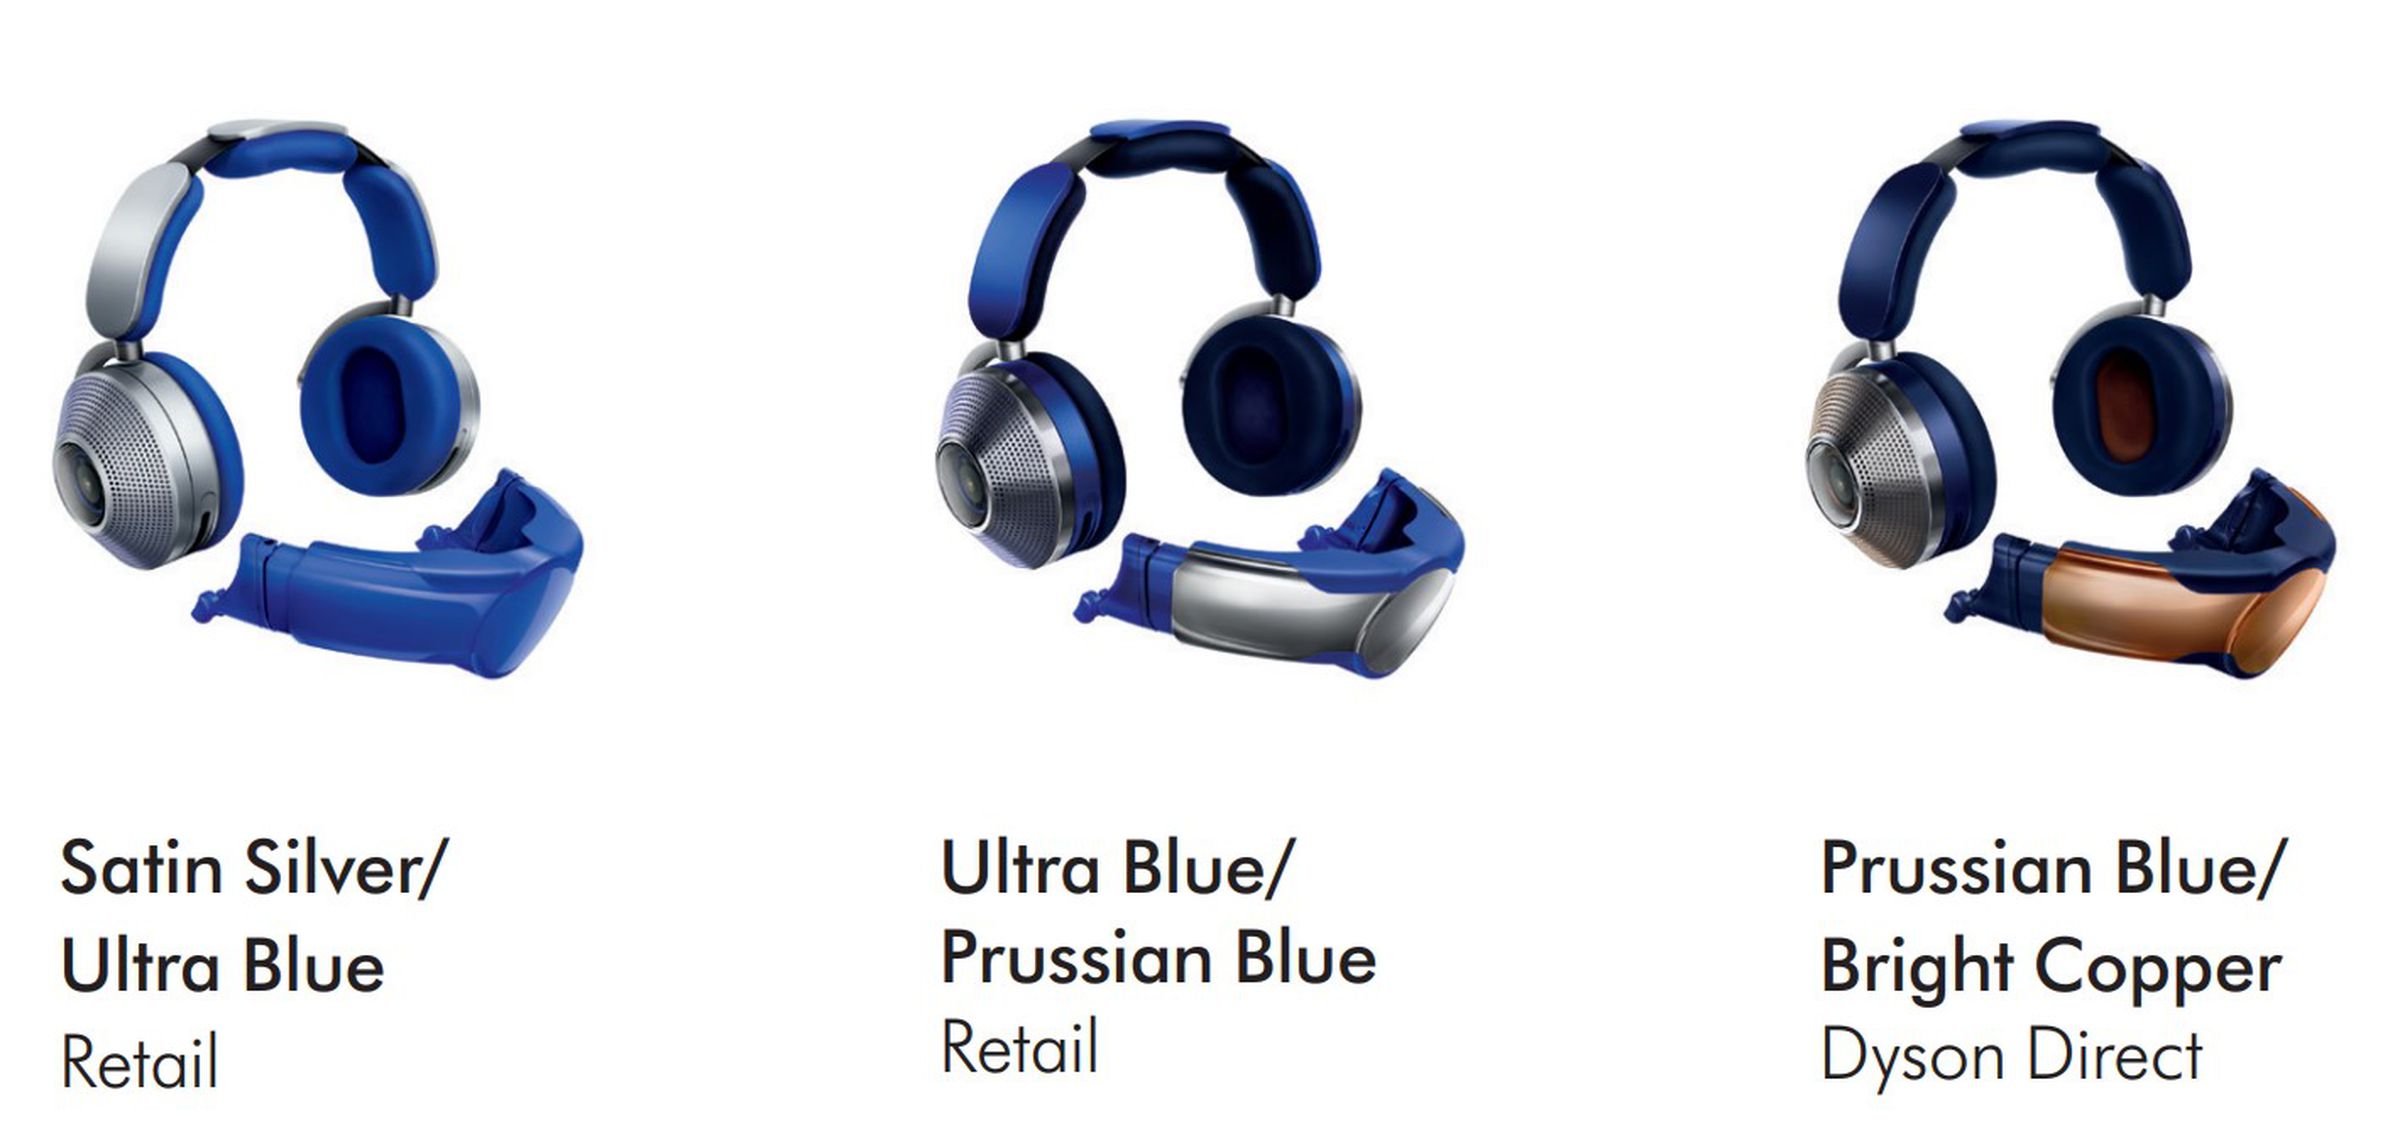 Three versions of the Dyson Zone headphones in various blue / metallic shades.